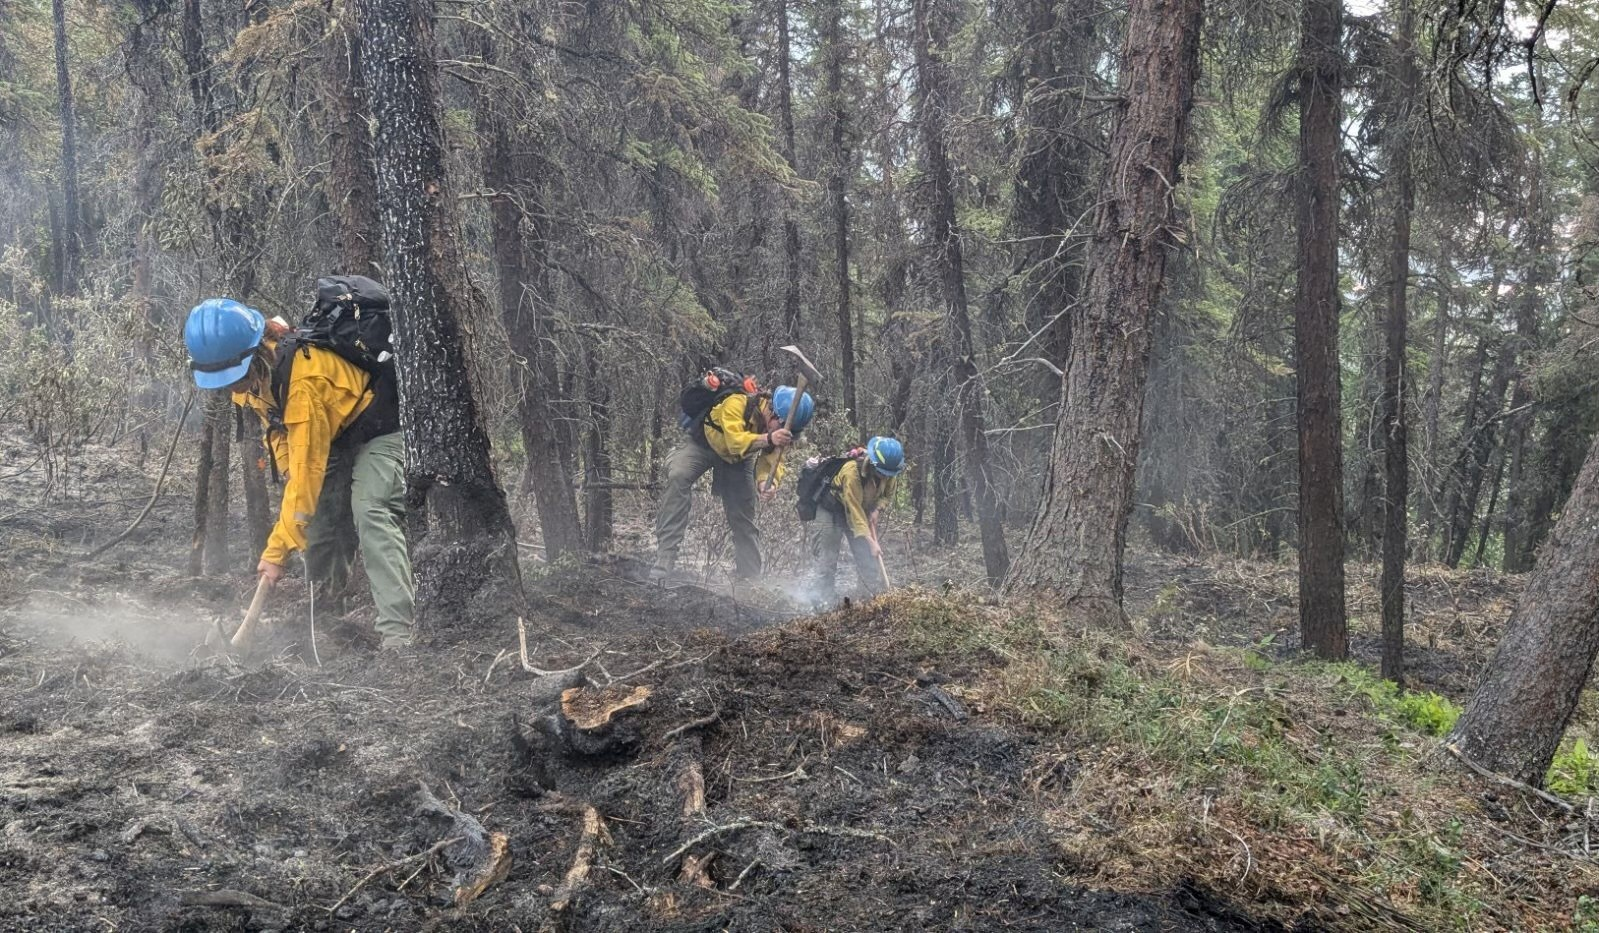 Three members of the wildland fire crew use tools on a steaming, burned section of ground